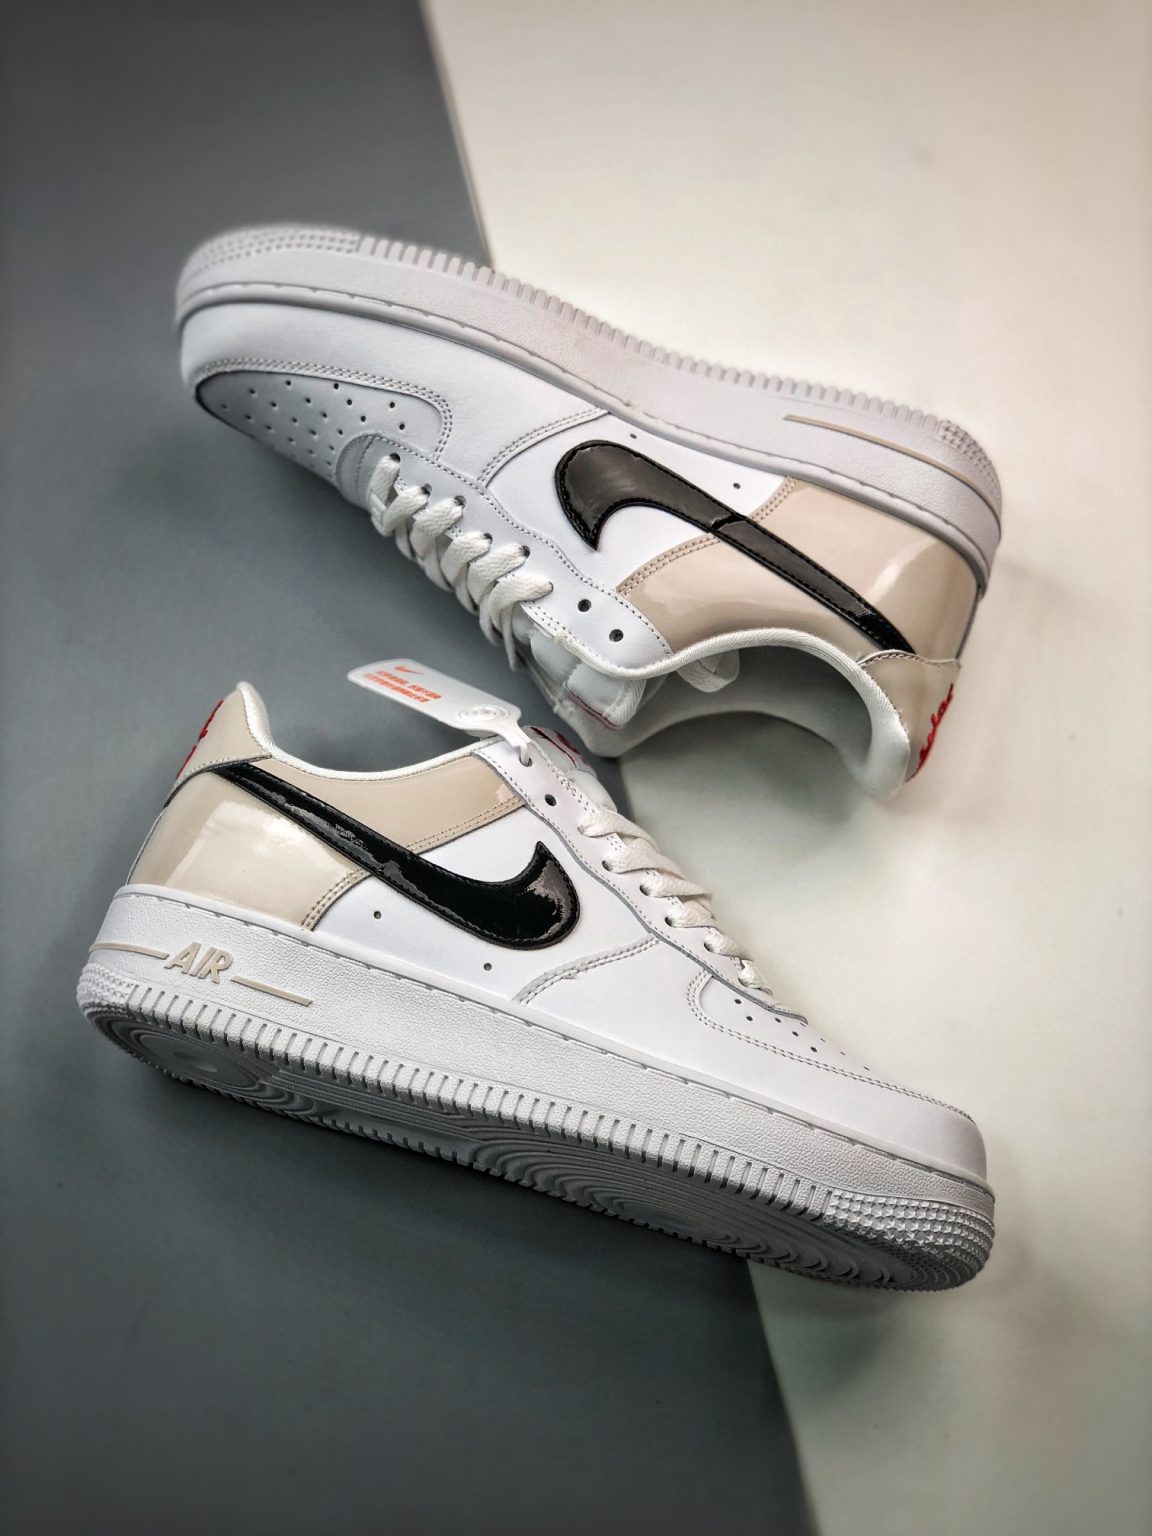 Nike Air Force 1 Low “Patent Swoosh” Light Iron Ore DQ7570-001 For Sale ...